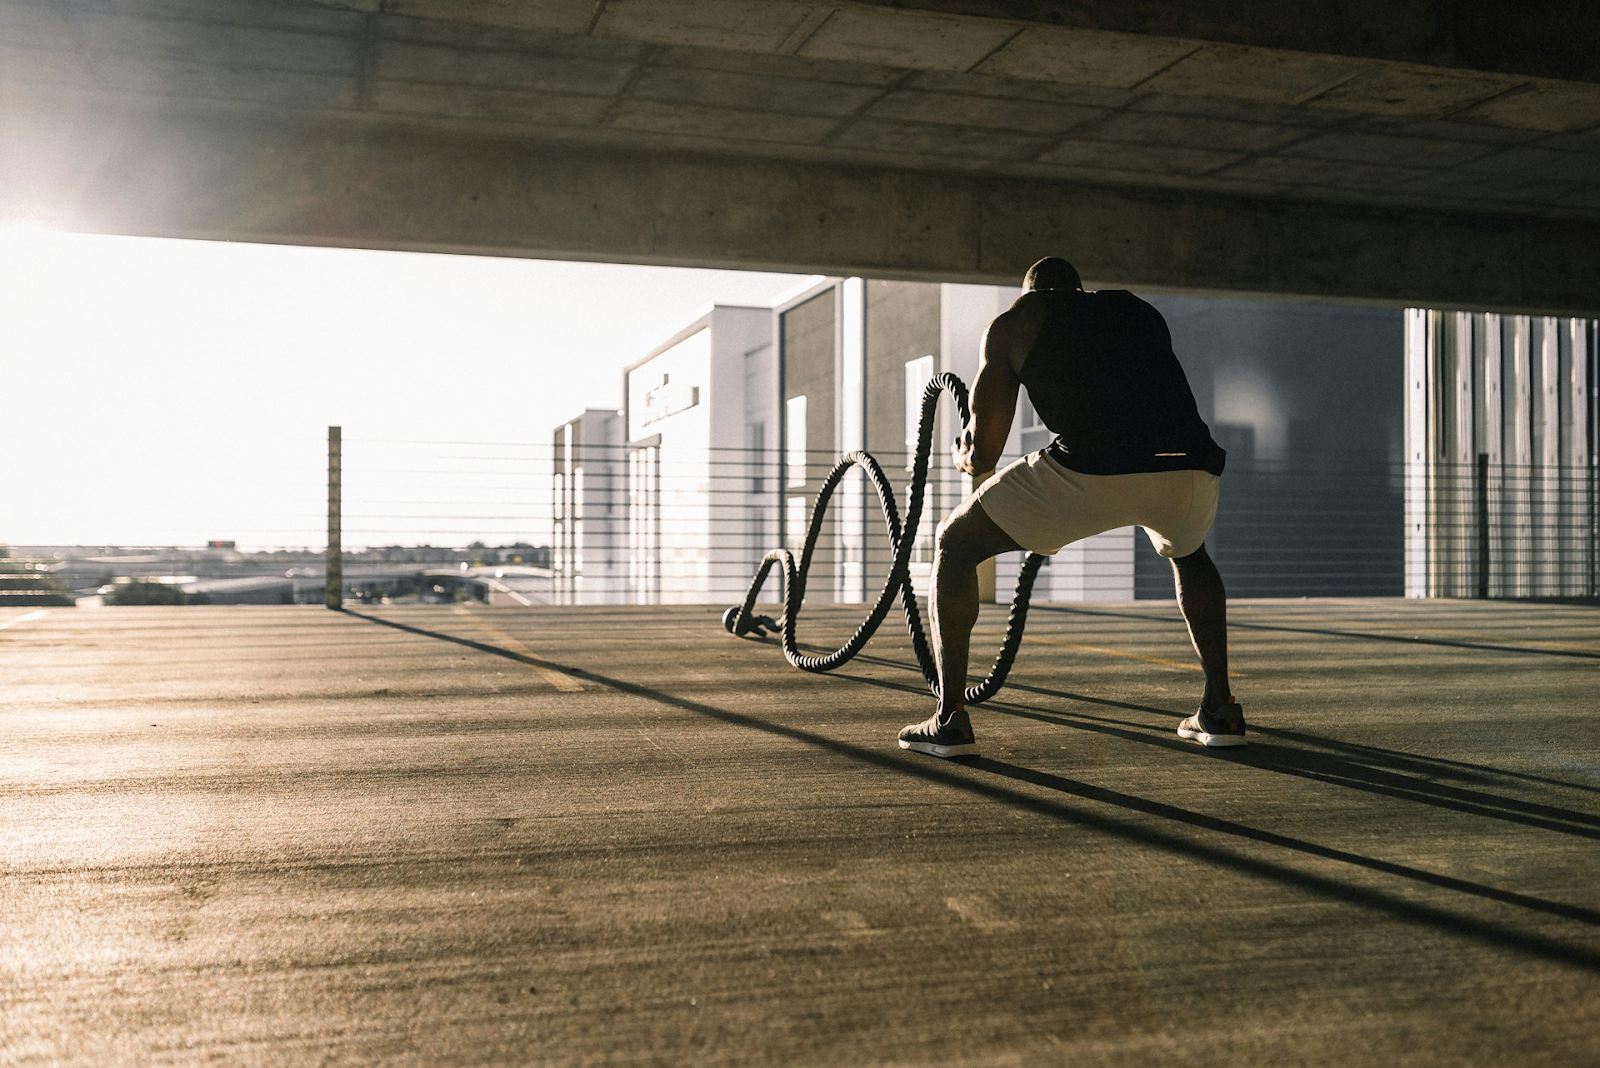 A man working out outside using jumps - https://unsplash.com/photos/man-in-black-t-shirt-and-white-shorts-walking-on-brown-wooden-floor-eGSBVVtVCCw